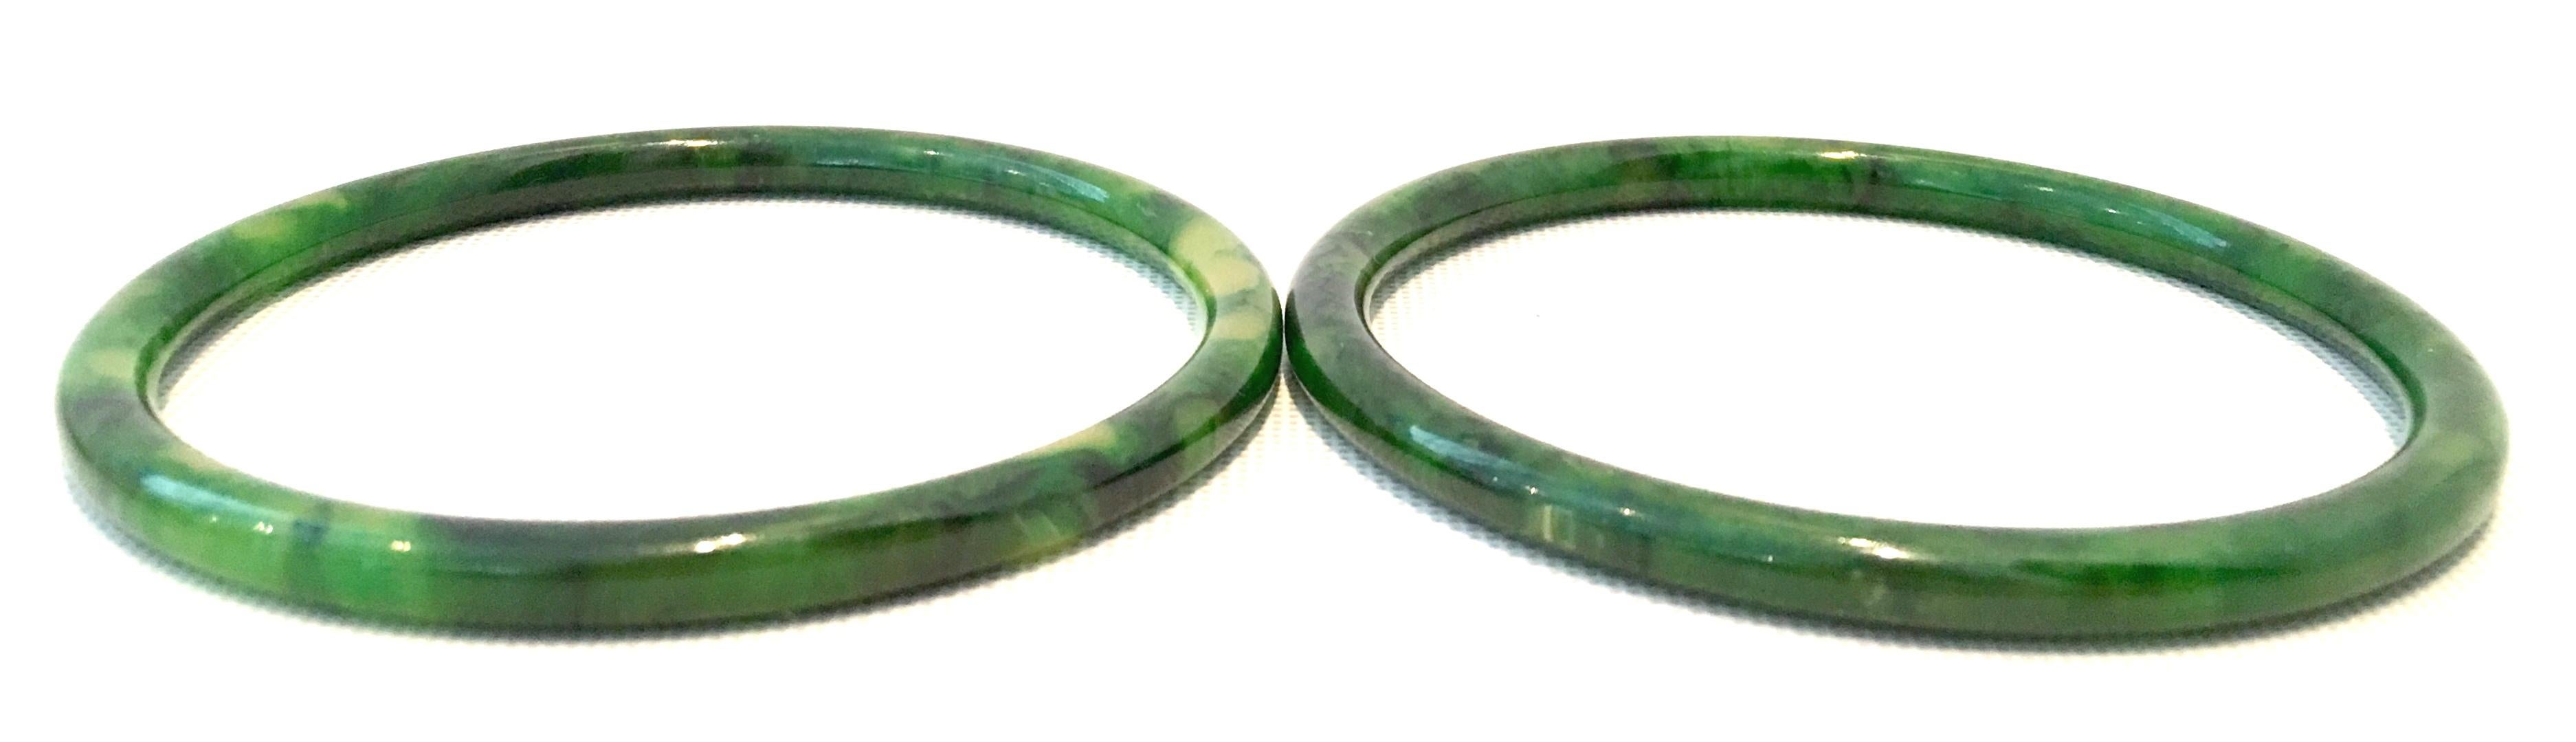 1930'S Bakelite Marbleized Green Bangle Bracelet and Earrings Set of Four Pieces. Set includes two bangle bracelets and one pair of earrings. Each bracelet is tubular and approximately, 3